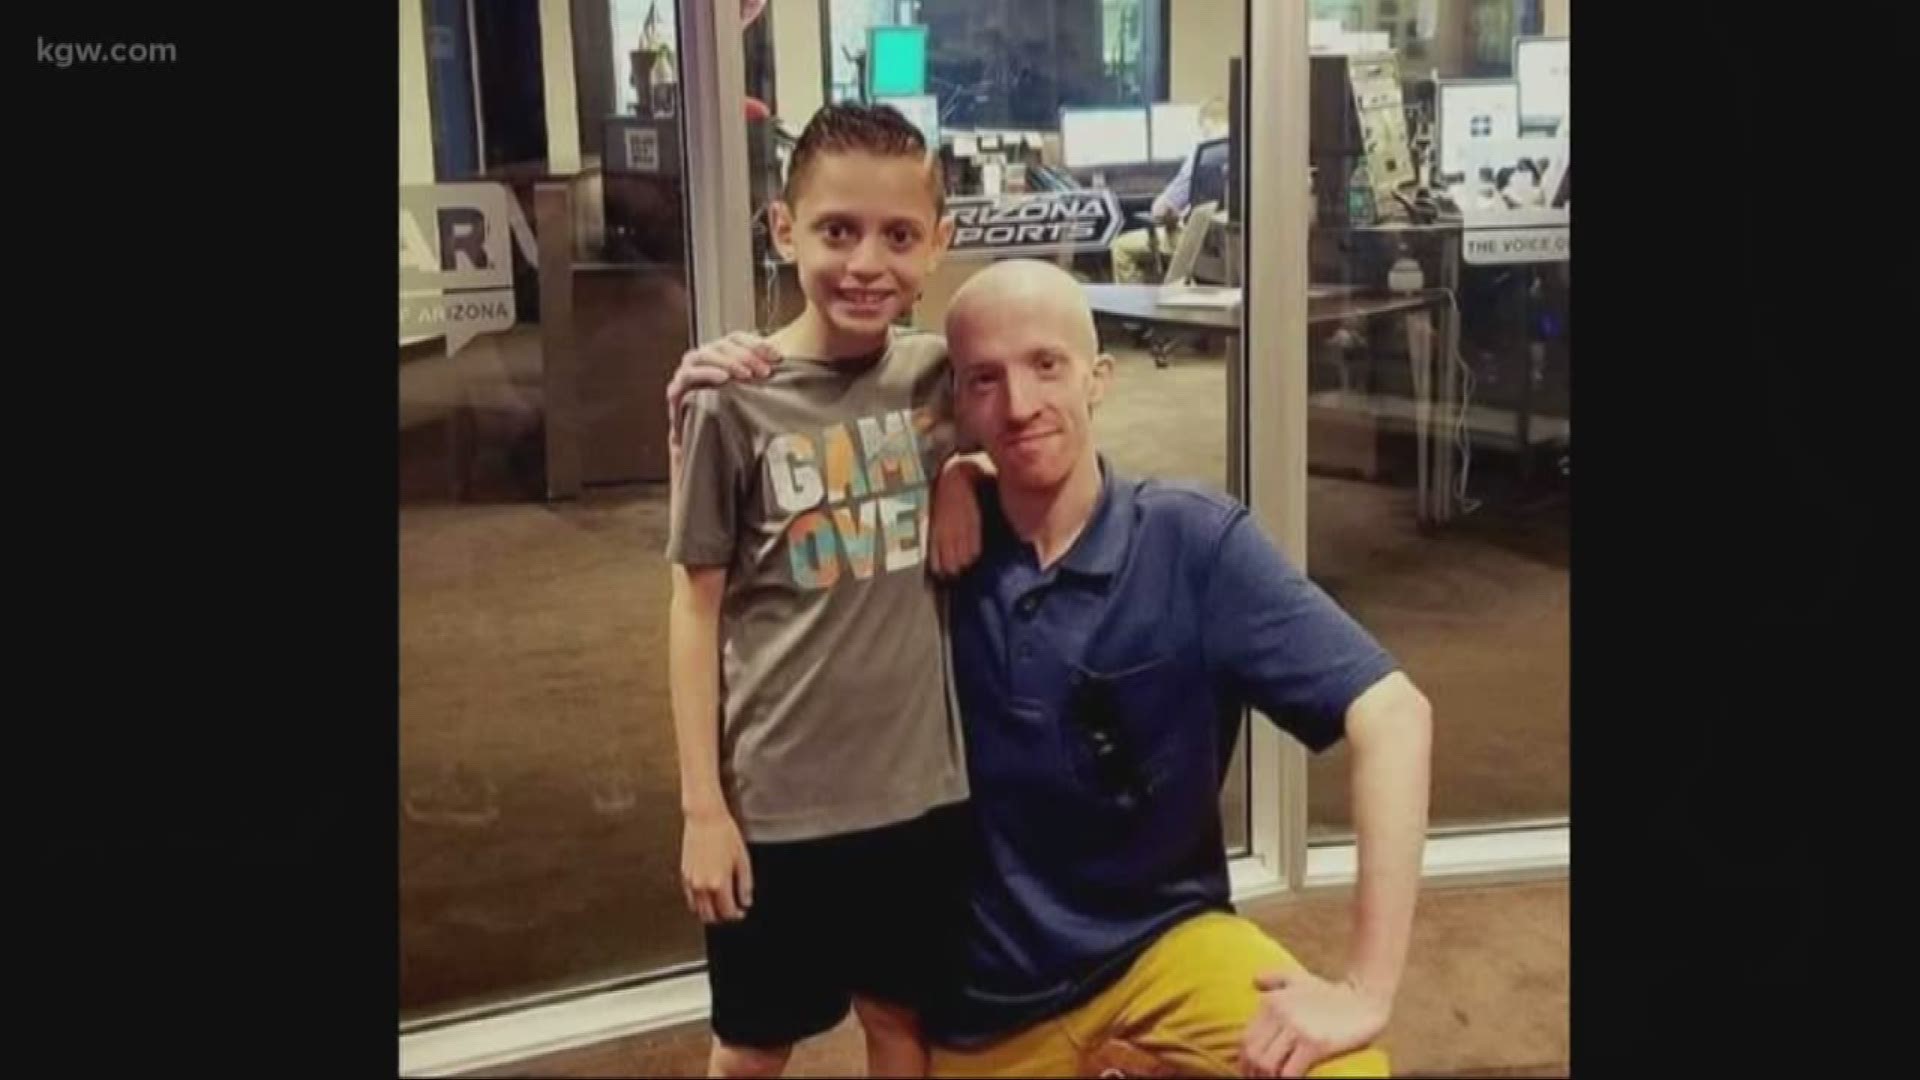 After hearing about a boy in Arizona who has an inoperable brain tumor, a Eugene man decided to do what he could to help. The two were once total strangers, but are now forever friends.